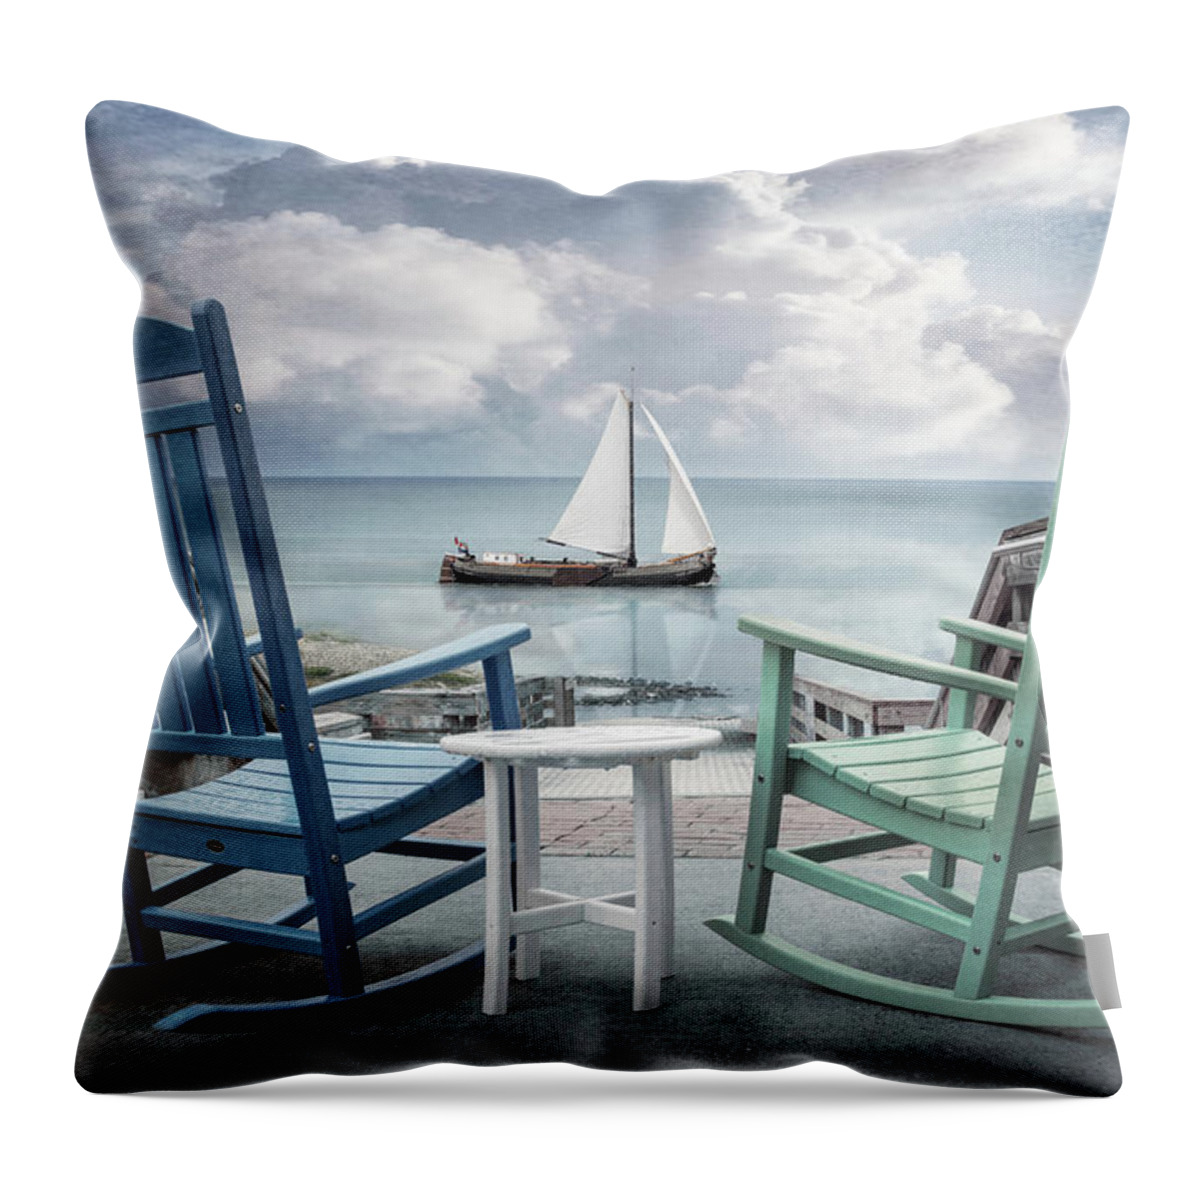 Boats Throw Pillow featuring the photograph Sail On in the Early Morning by Debra and Dave Vanderlaan